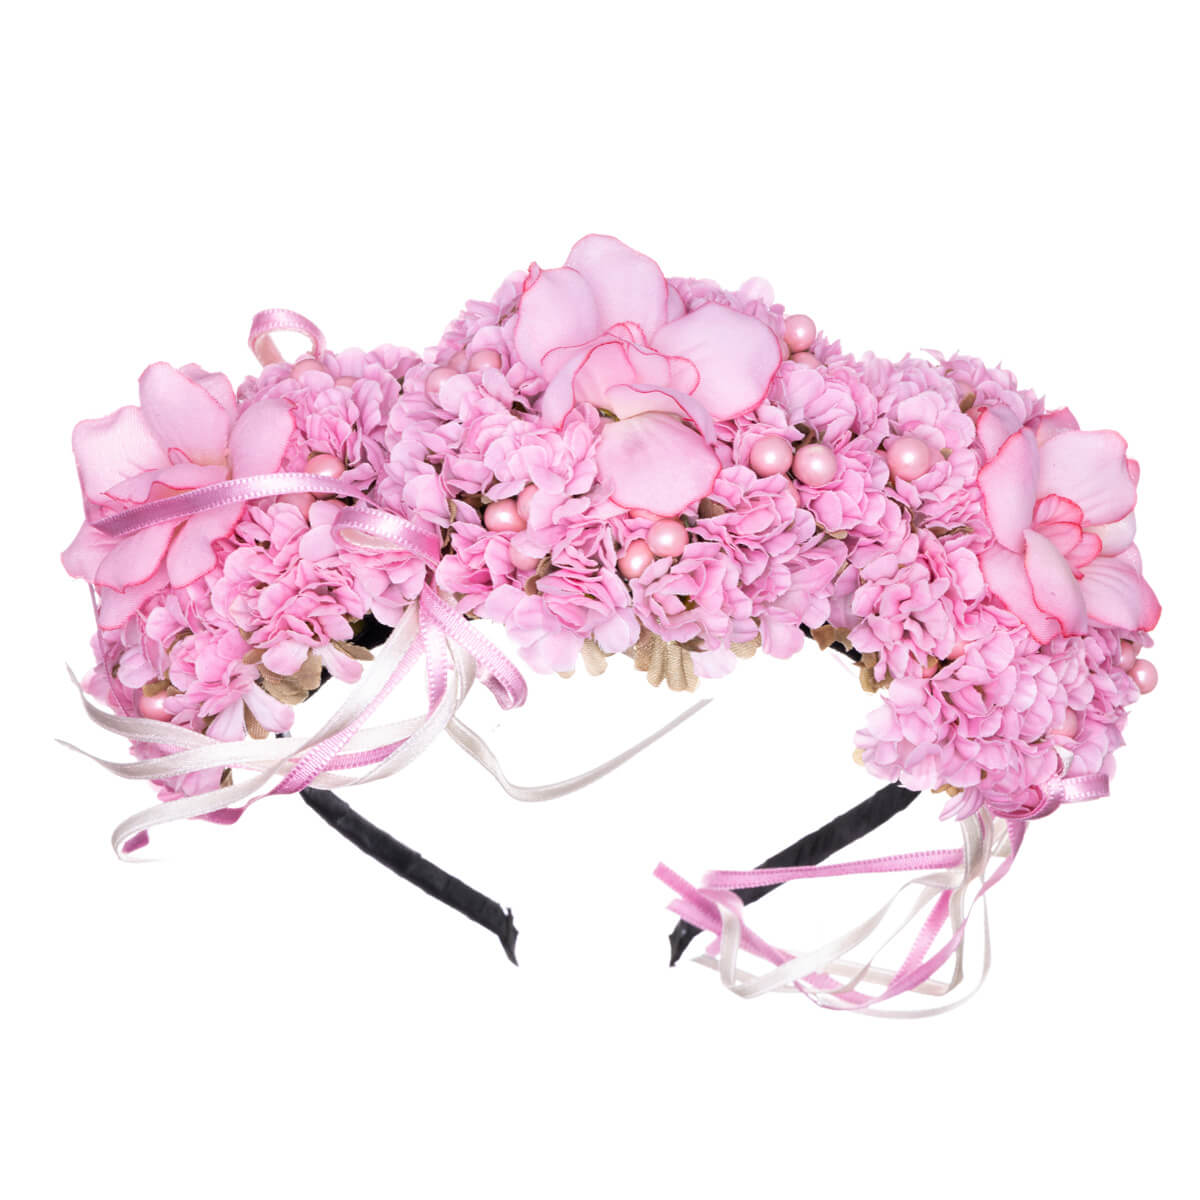 Rich floral hairband with ribbons